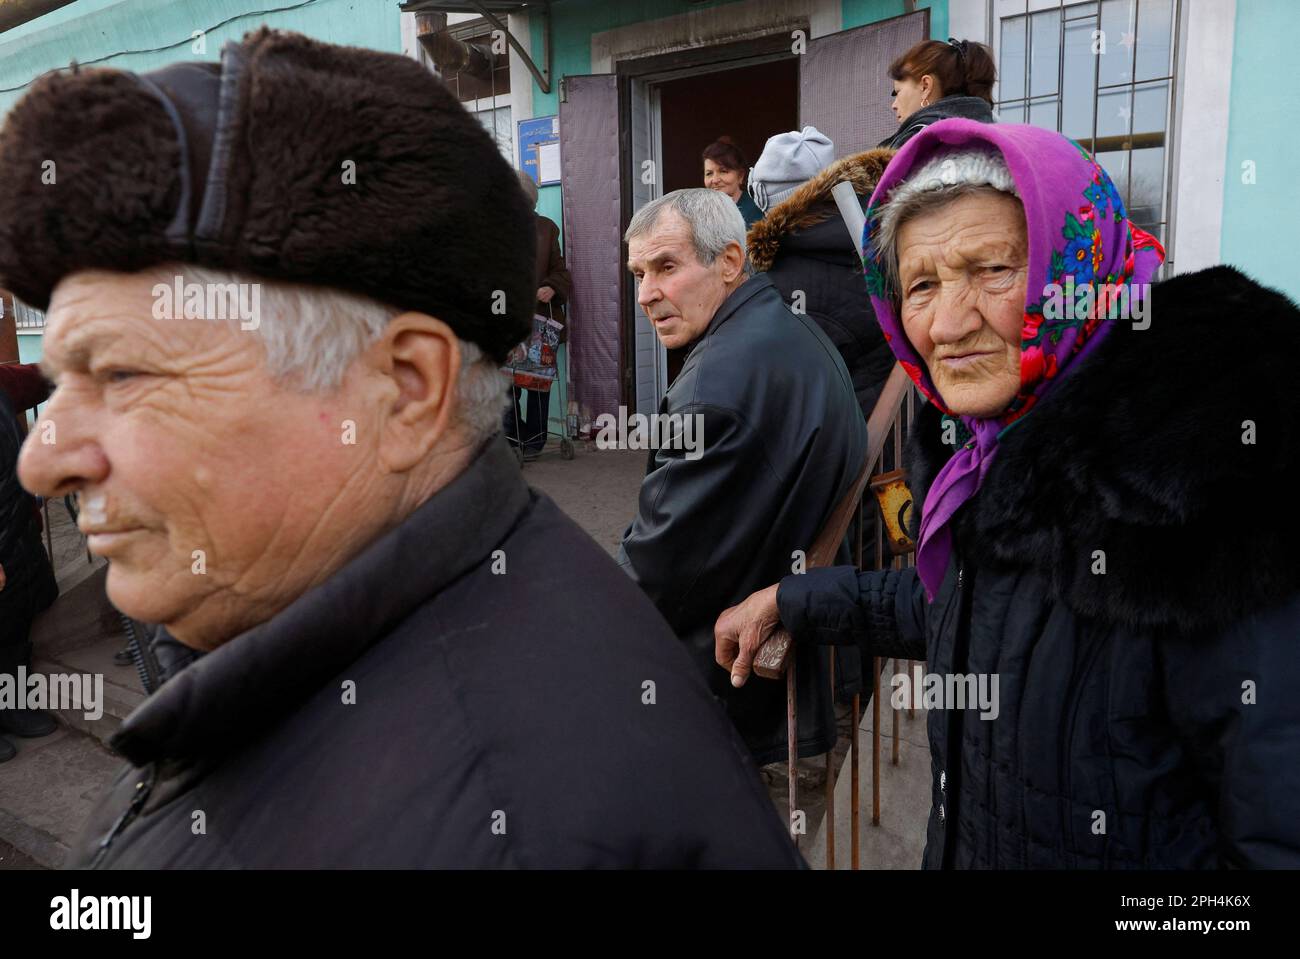 Local residents gather to receive aid delivered by volunteers in the course of Russia-Ukraine conflict in the settlement of Nyzhnie, in the Luhansk region, Russian-controlled Ukraine, March 24, 2023. REUTERS/Alexander Ermochenko Stock Photo